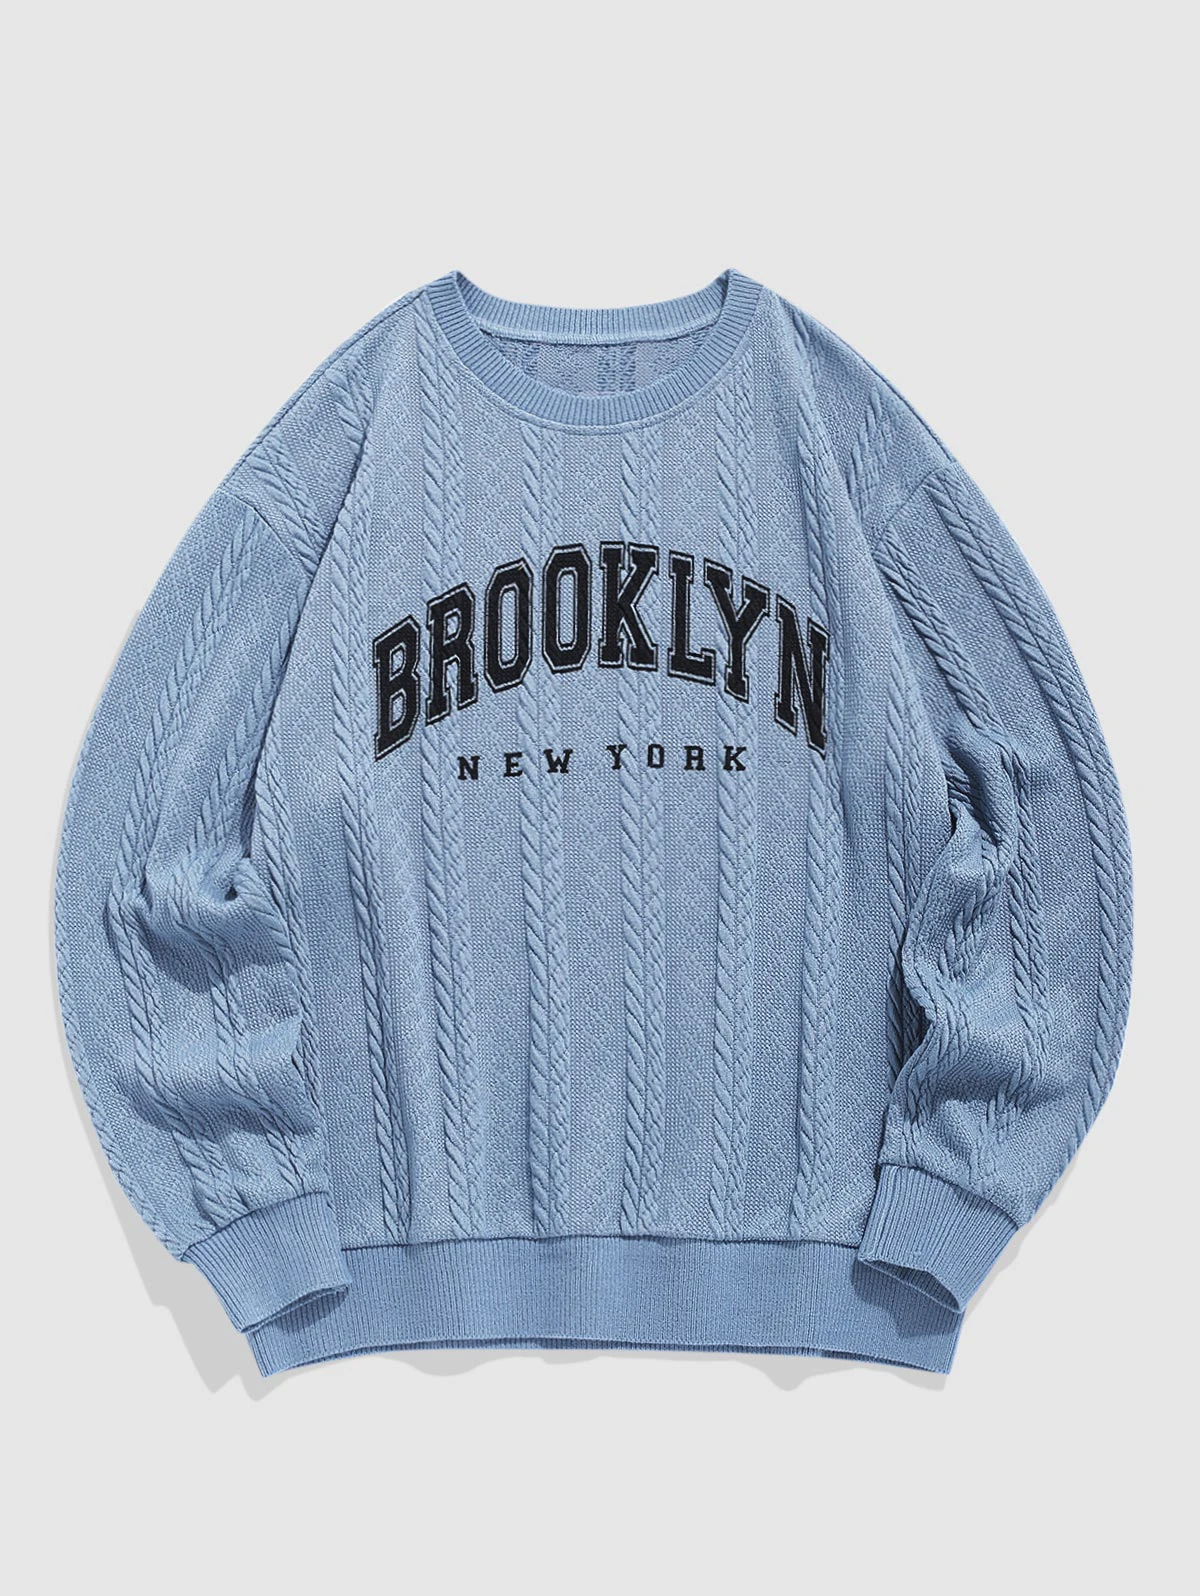 

ZAFUL Men's Casual Letter BROOKLYN NEW YORK Graphic Printed Jacquard Textured Cable Knit Crew Neck Long Sleeve Sweater